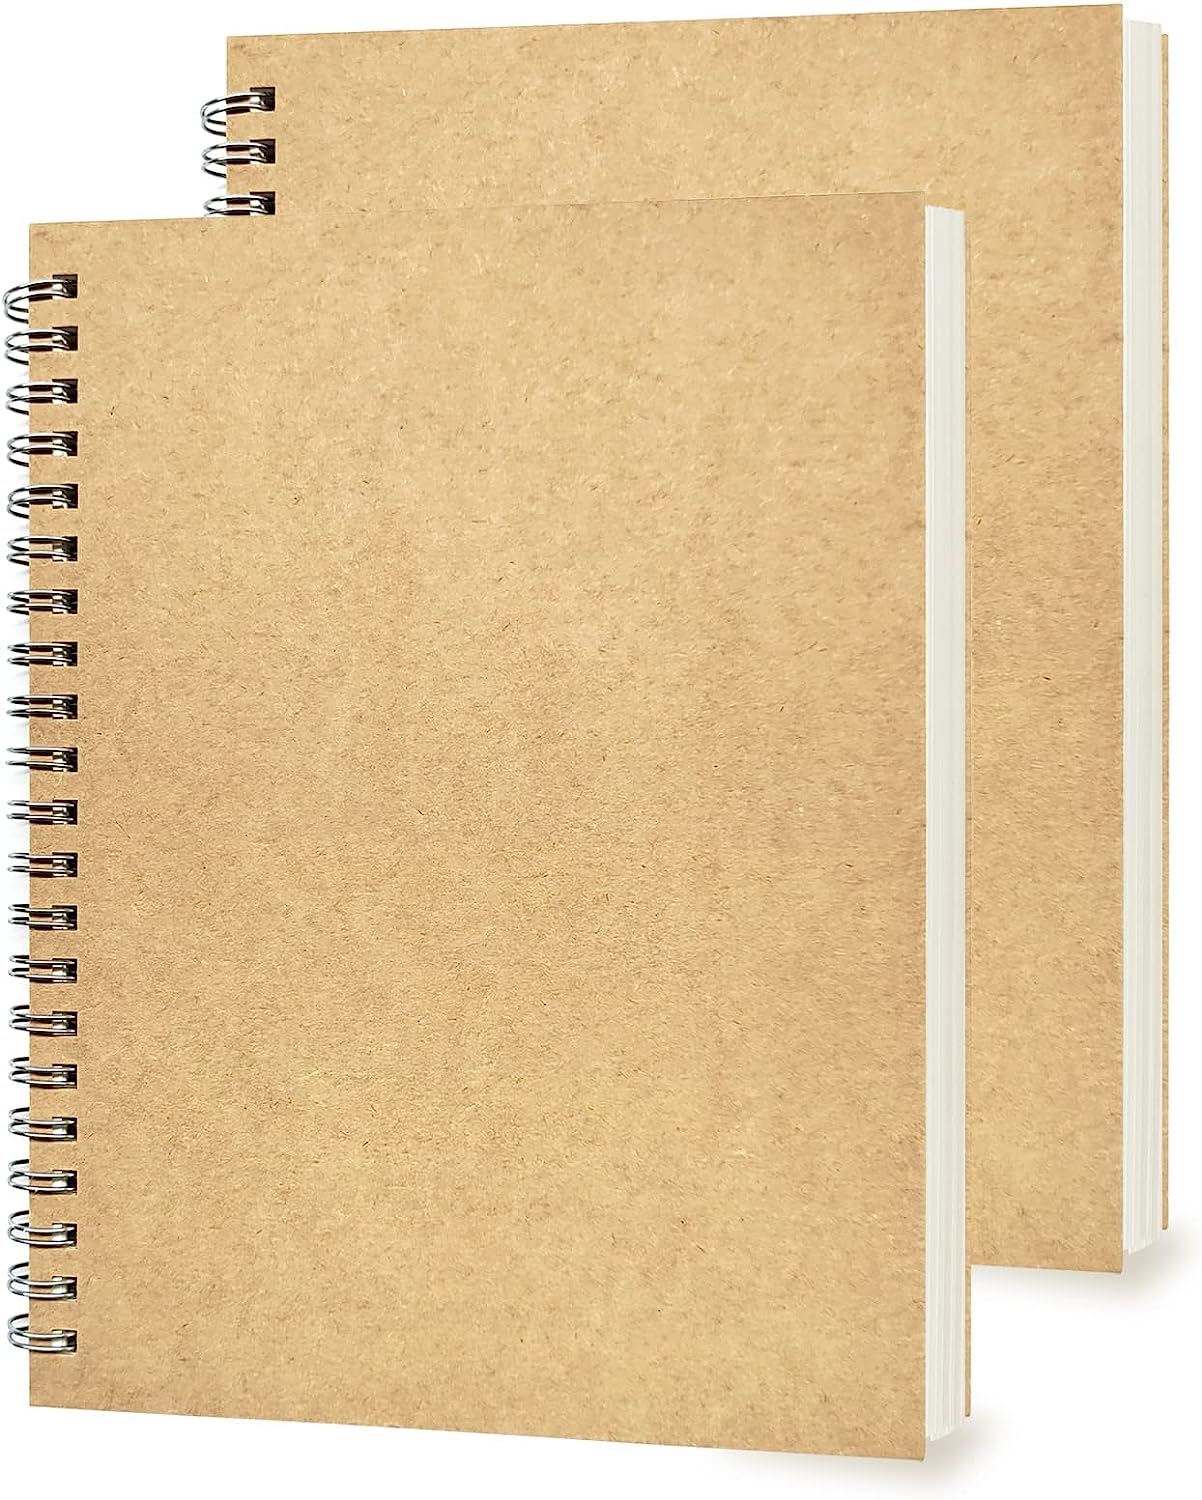 2 Pack College Ruled Notebook, Soft Yellow Cover [...]